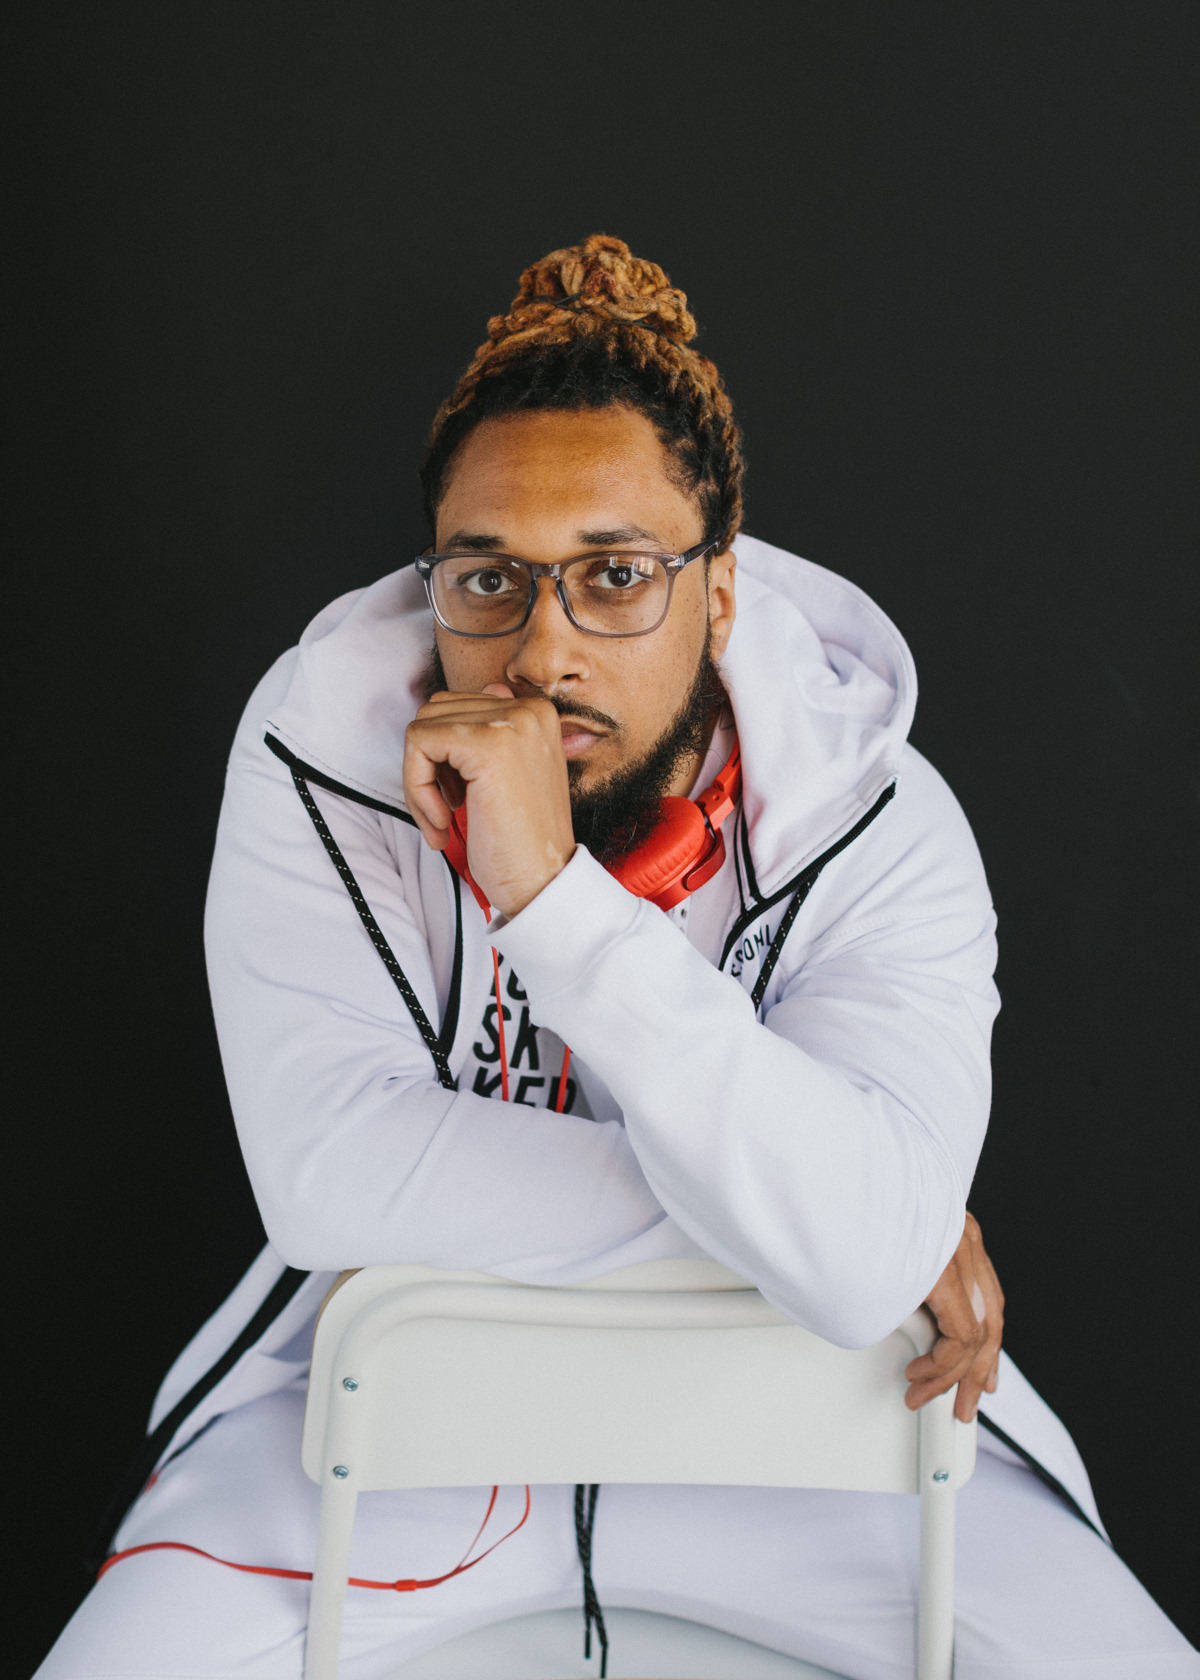 A branding portrait of a man in a white track suit seated in front of a black studio backdrop.